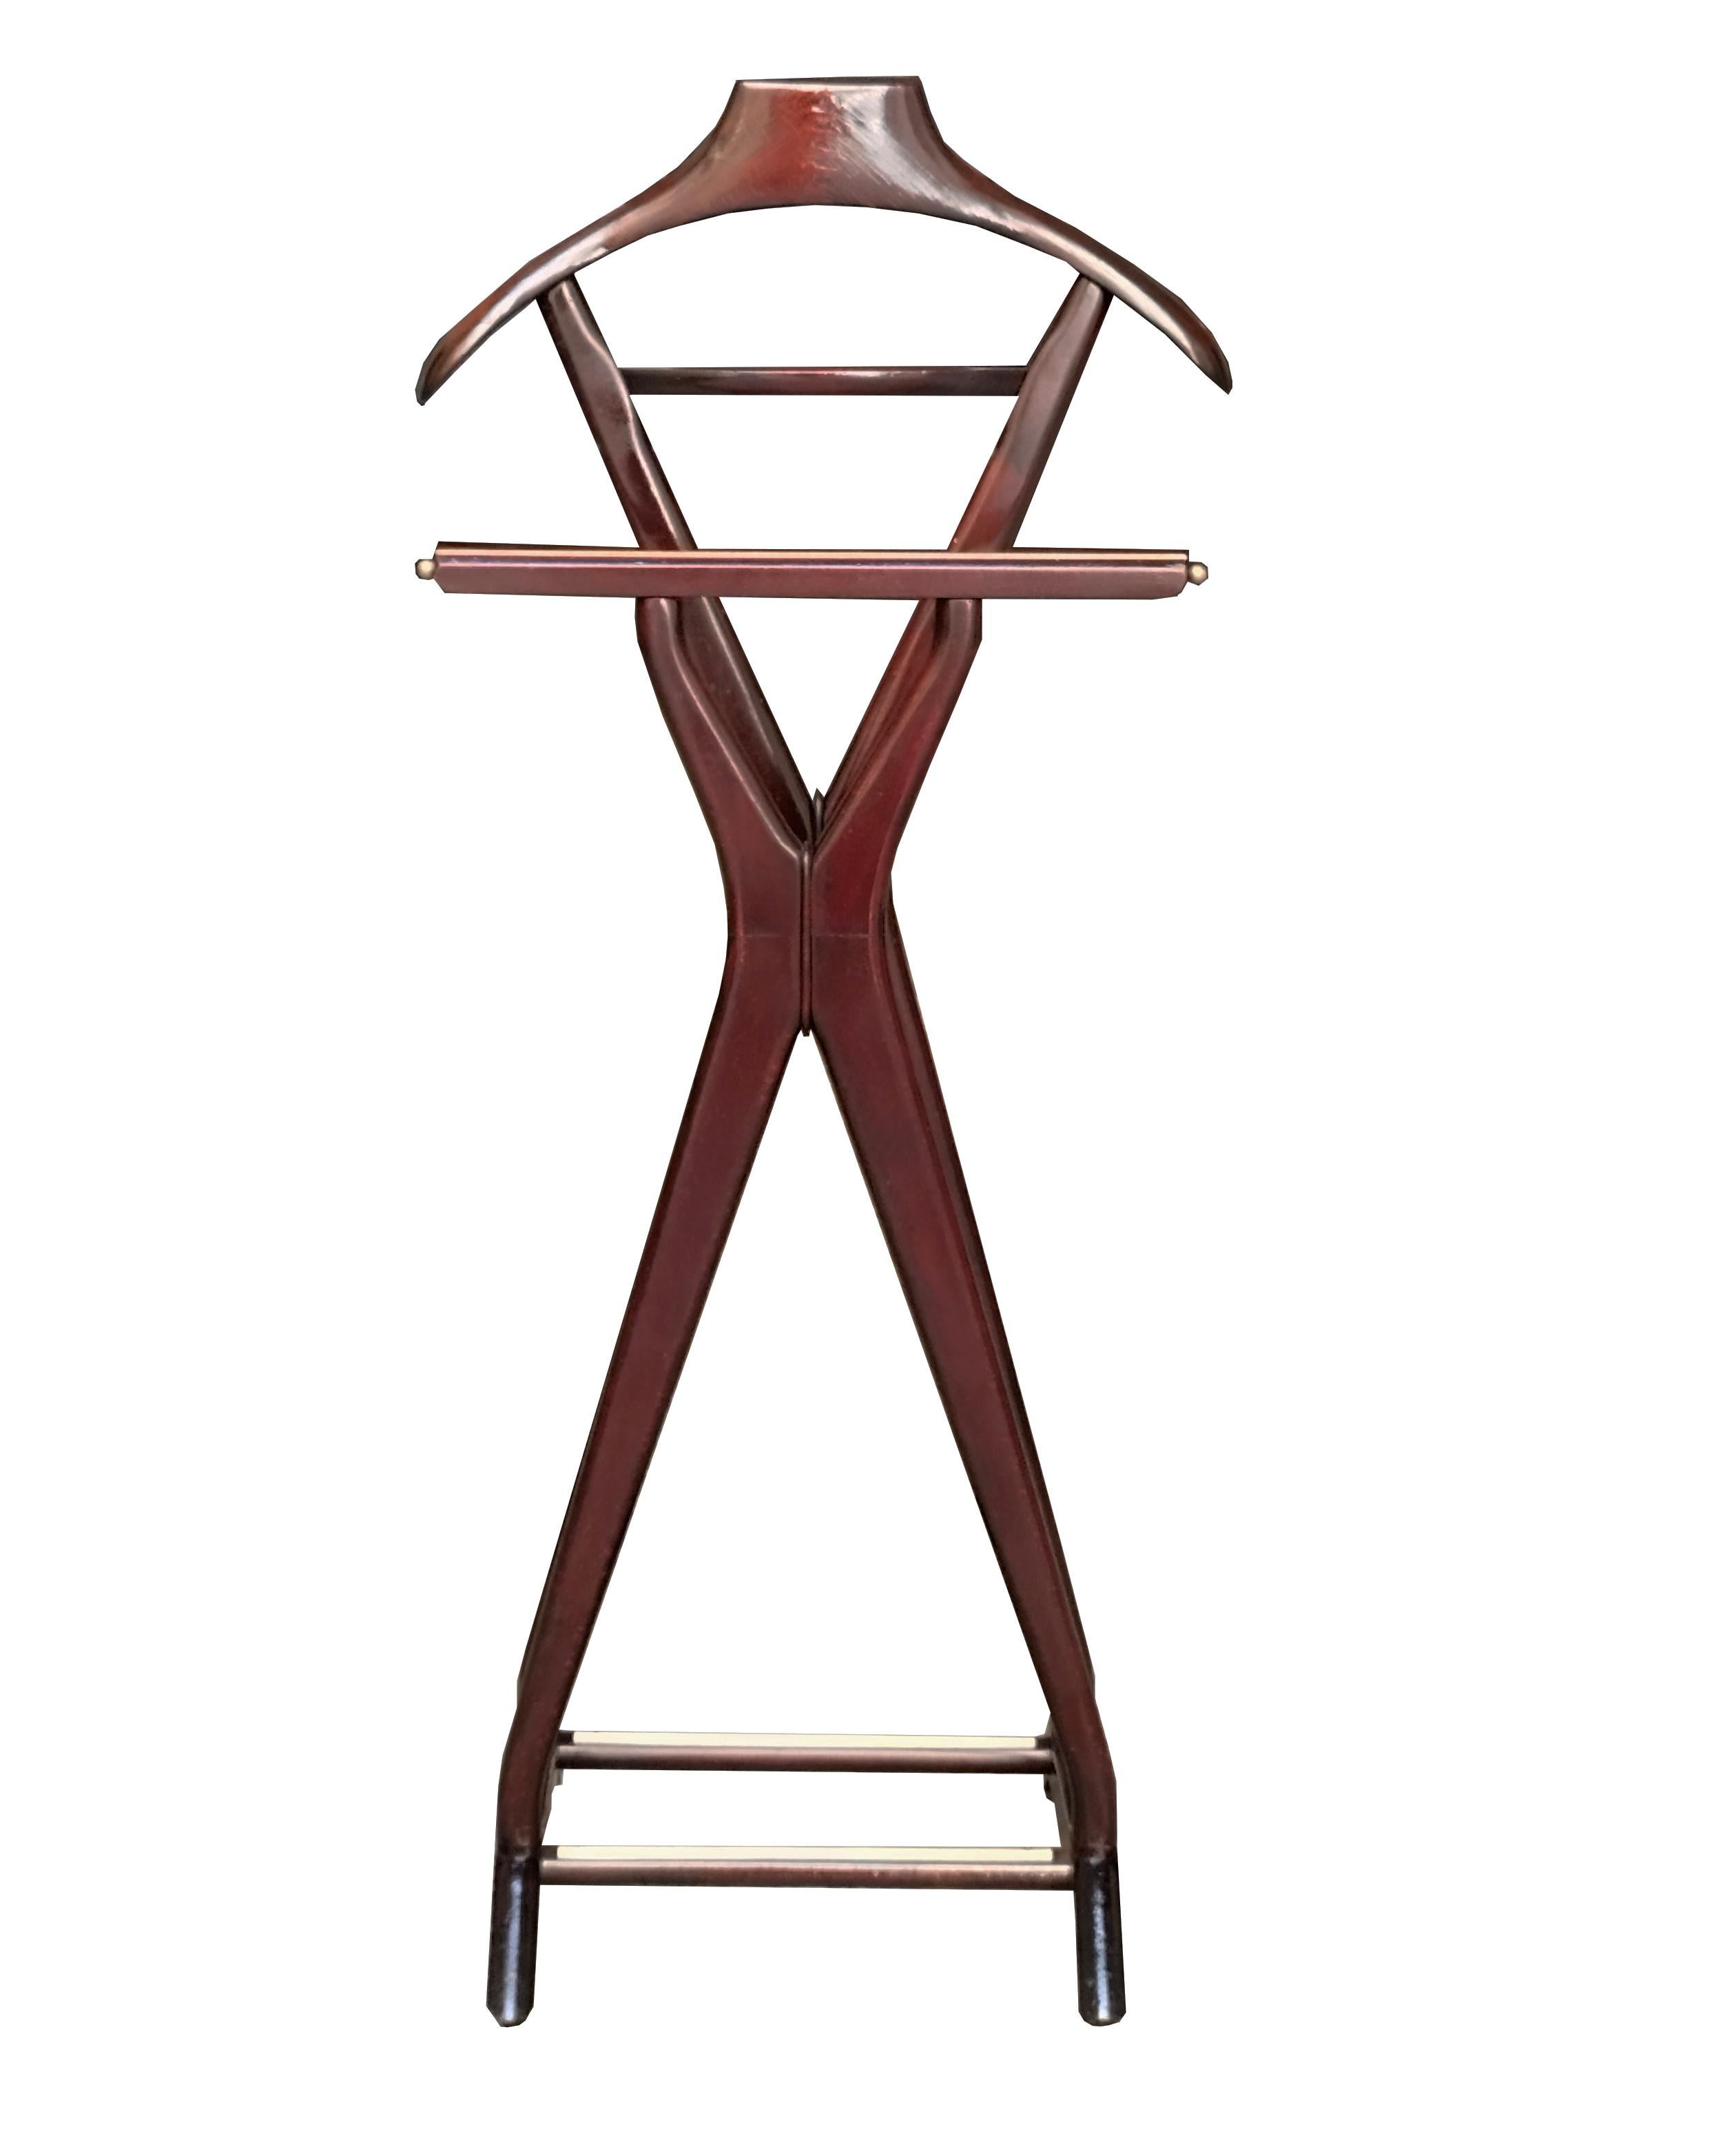 Wooden servomuto designed by Ico Parisi in the 1960s for the firm F.lli Reguitti Italia, in good condition, with jacket rack, trouser rack, shoe rack, tie or scarf hanger, and small central shelf. Imprinted trademark Fratelli Reguitti